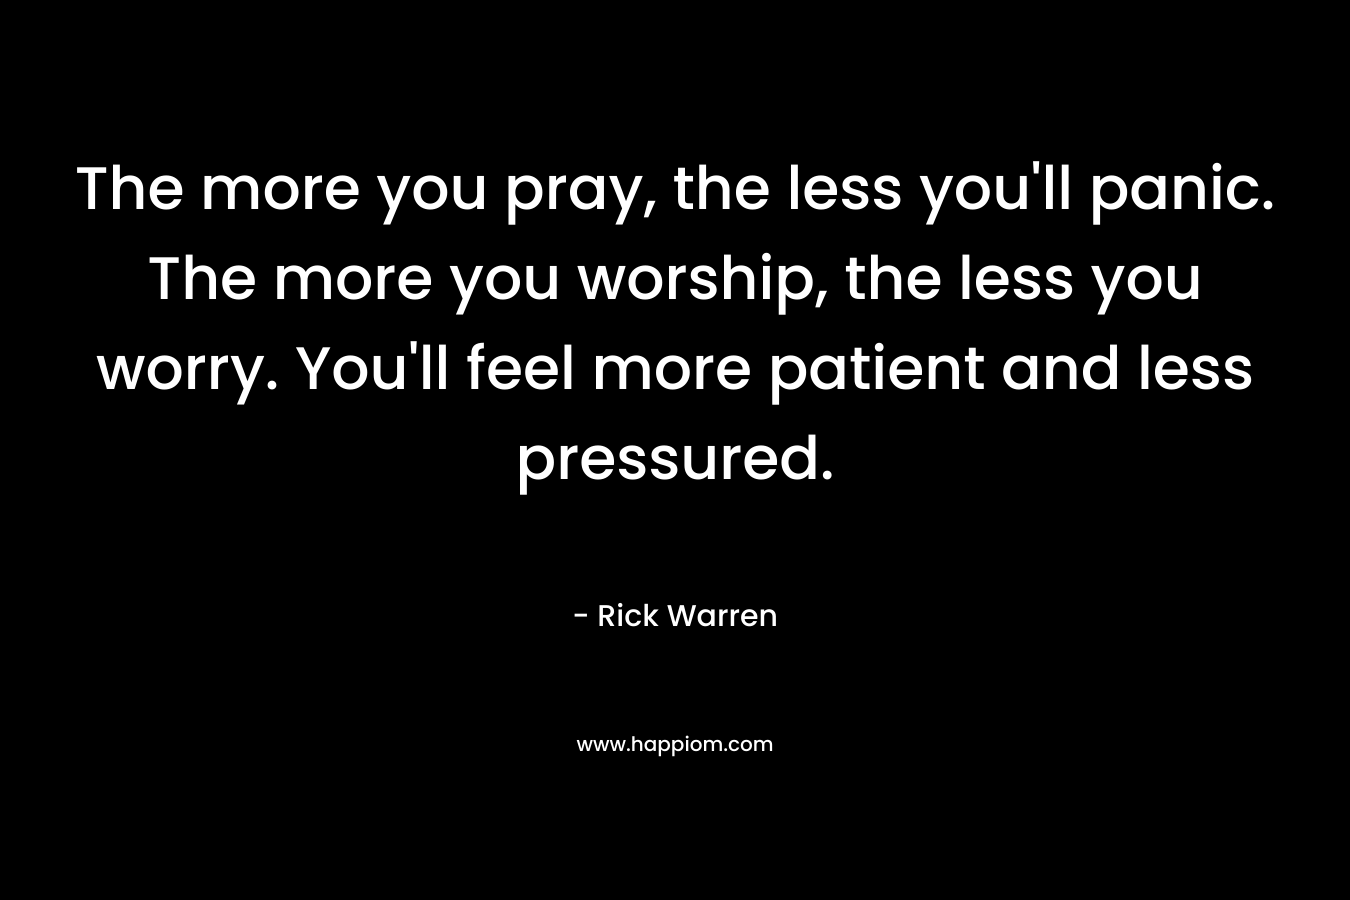 The more you pray, the less you'll panic. The more you worship, the less you worry. You'll feel more patient and less pressured.